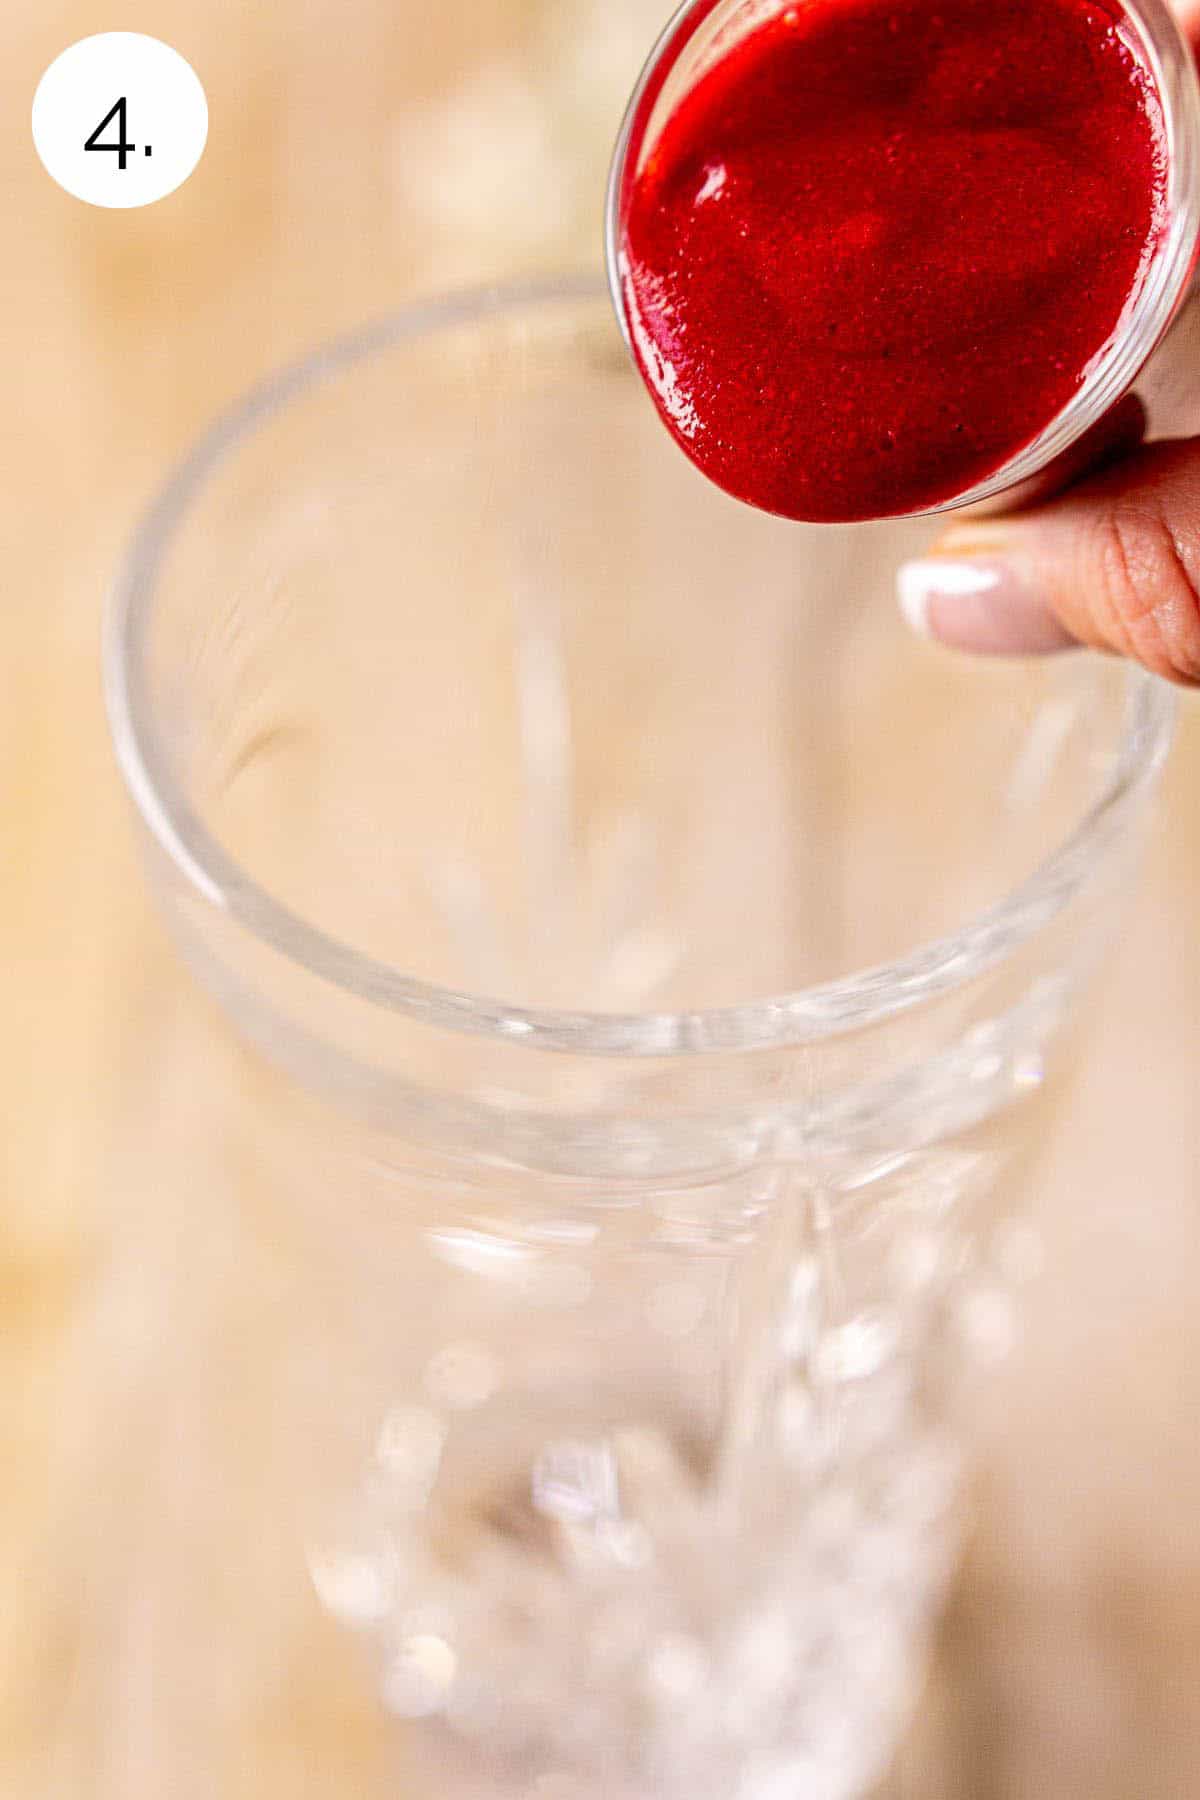 A hand pouring a shot glass of the raspberry purée into a crystal cocktail shaker against a cream-colored wooden surface.